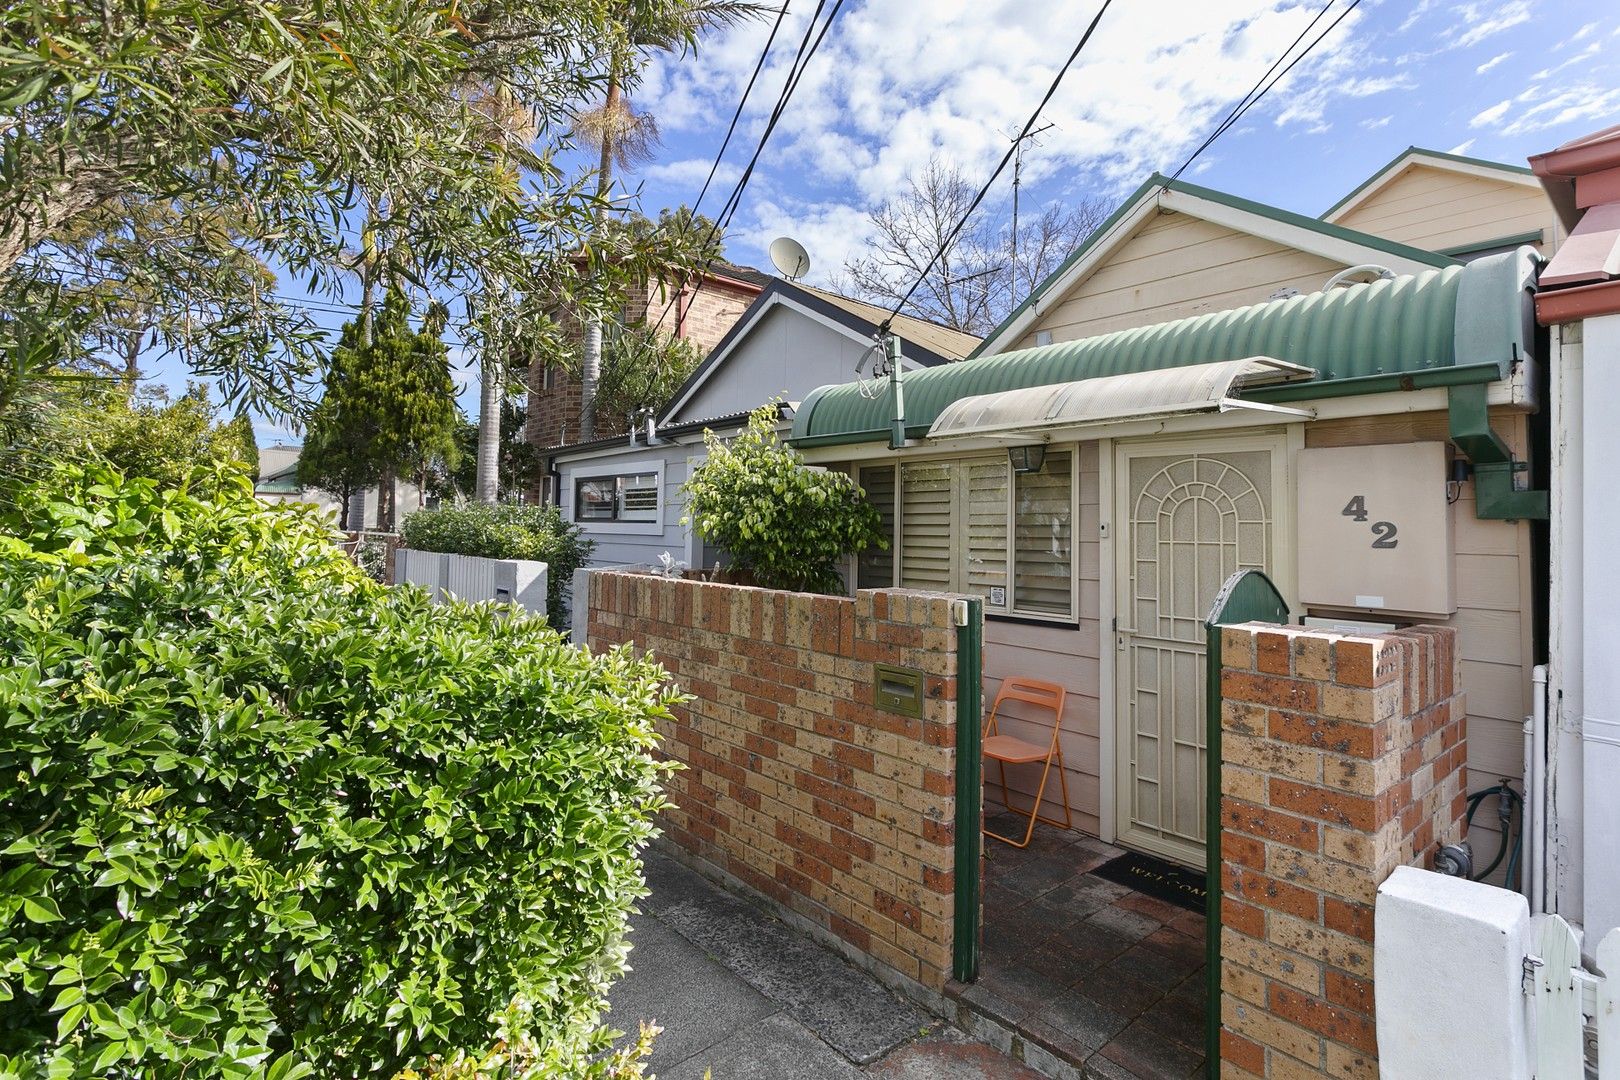 2 bedrooms House in 42 Alfred Street MASCOT NSW, 2020